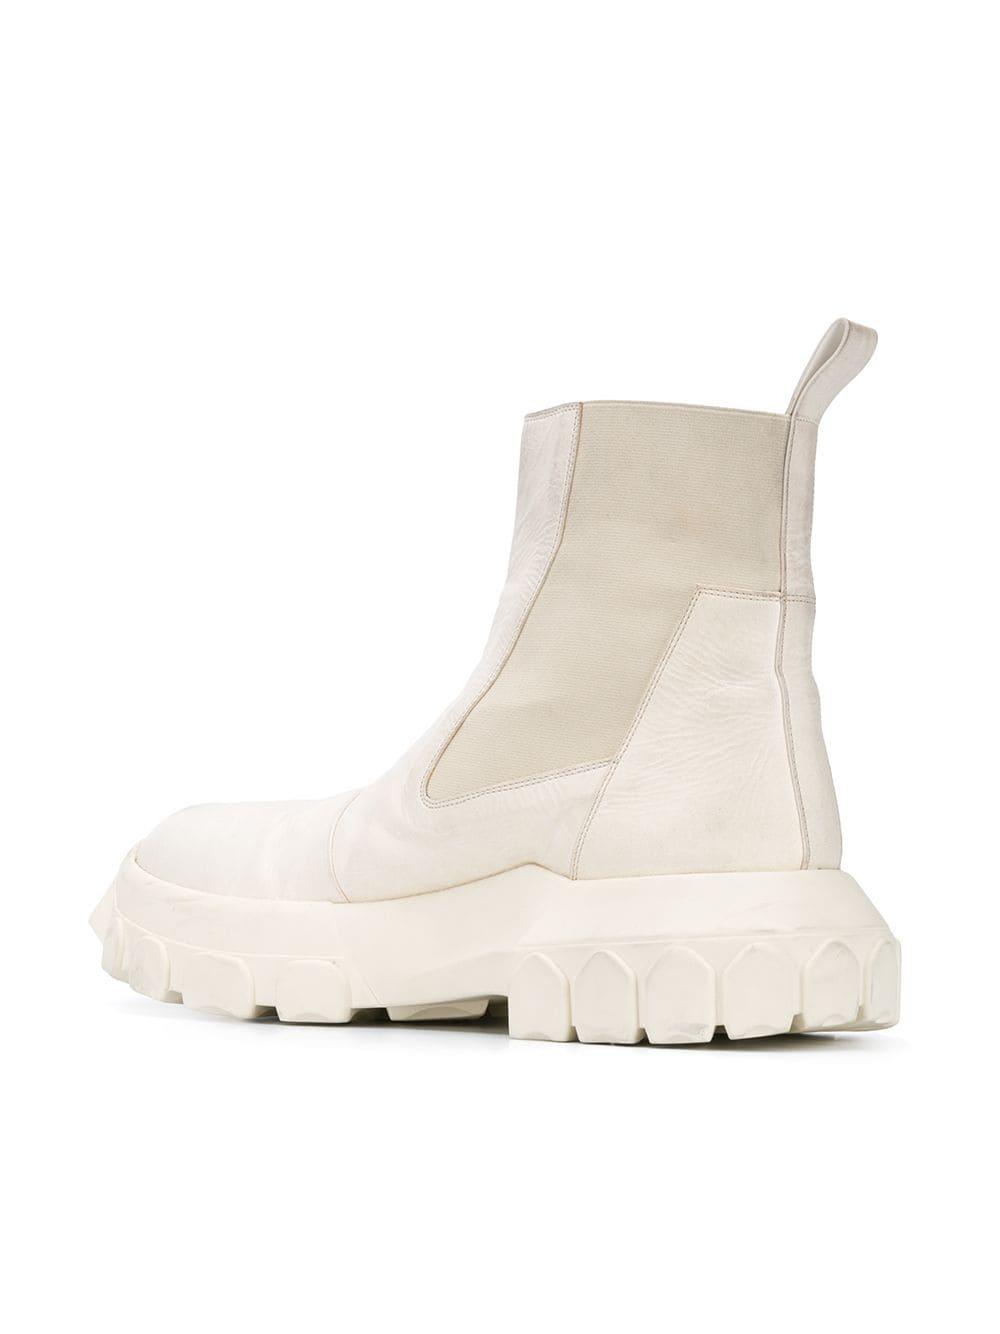 Rick Owens Bozo Tractor Beetle Boots for Men | Lyst